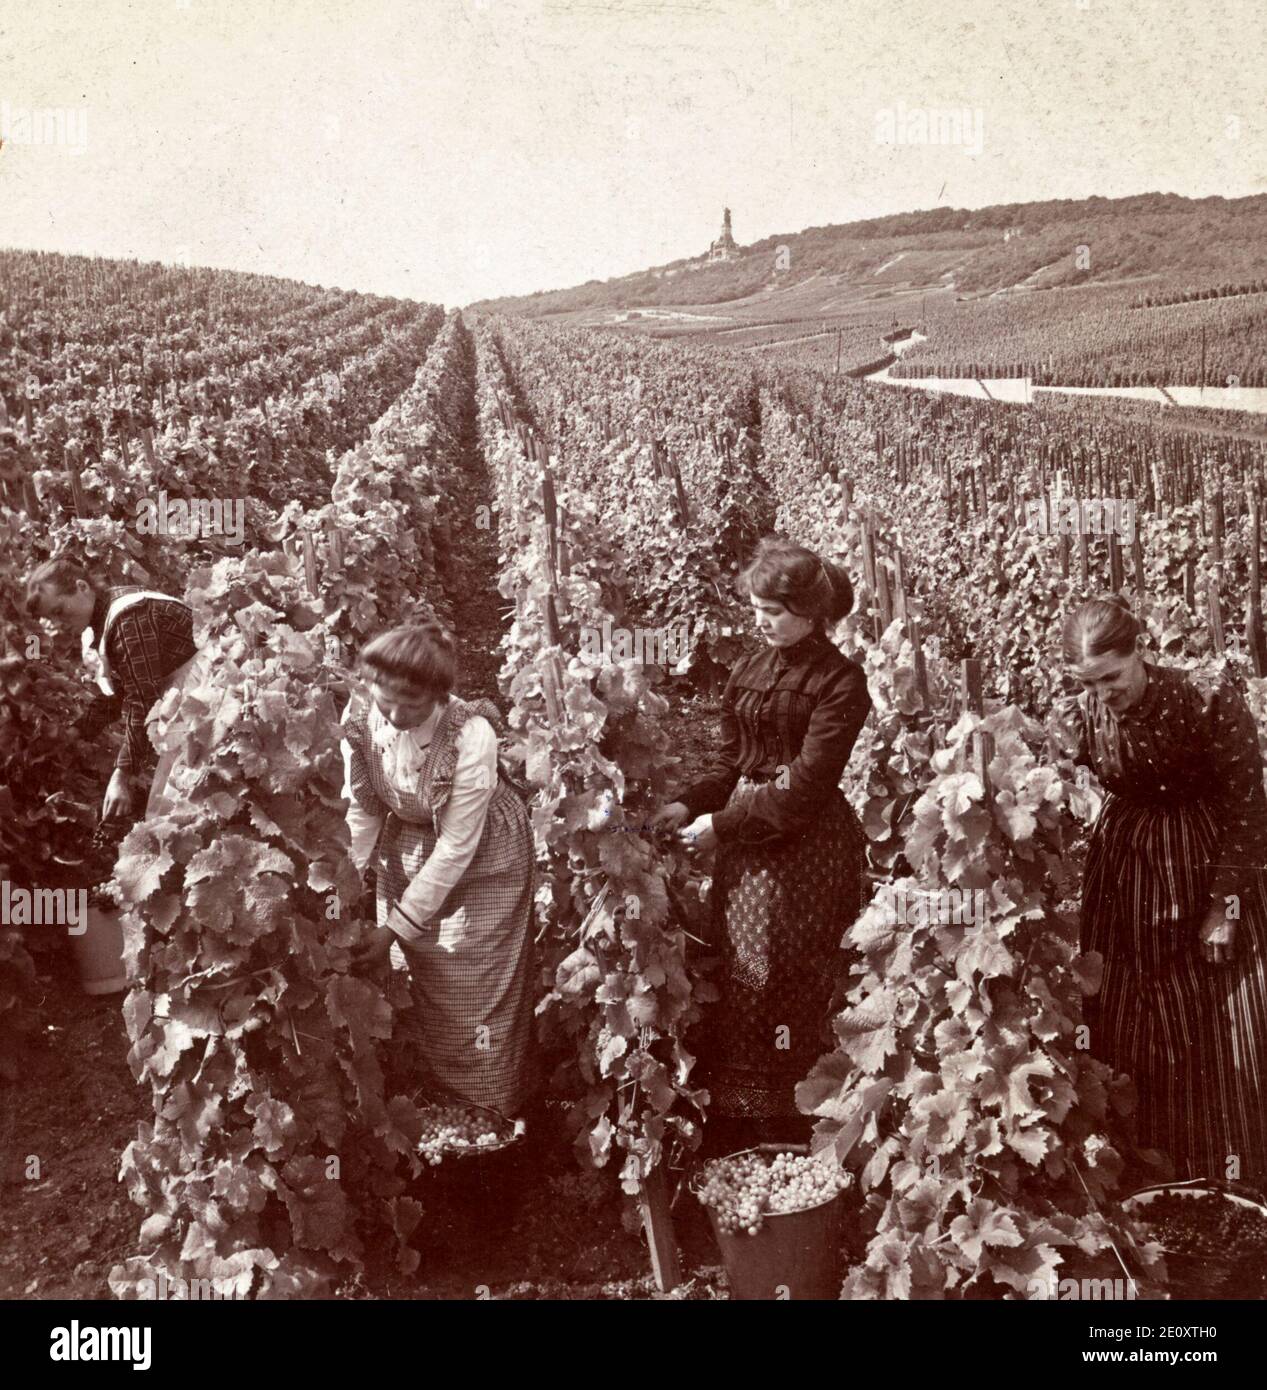 Toiling in the vineyards - Picking the luscious grapes, Rudesheim, Germany, circa 1904 Stock Photo